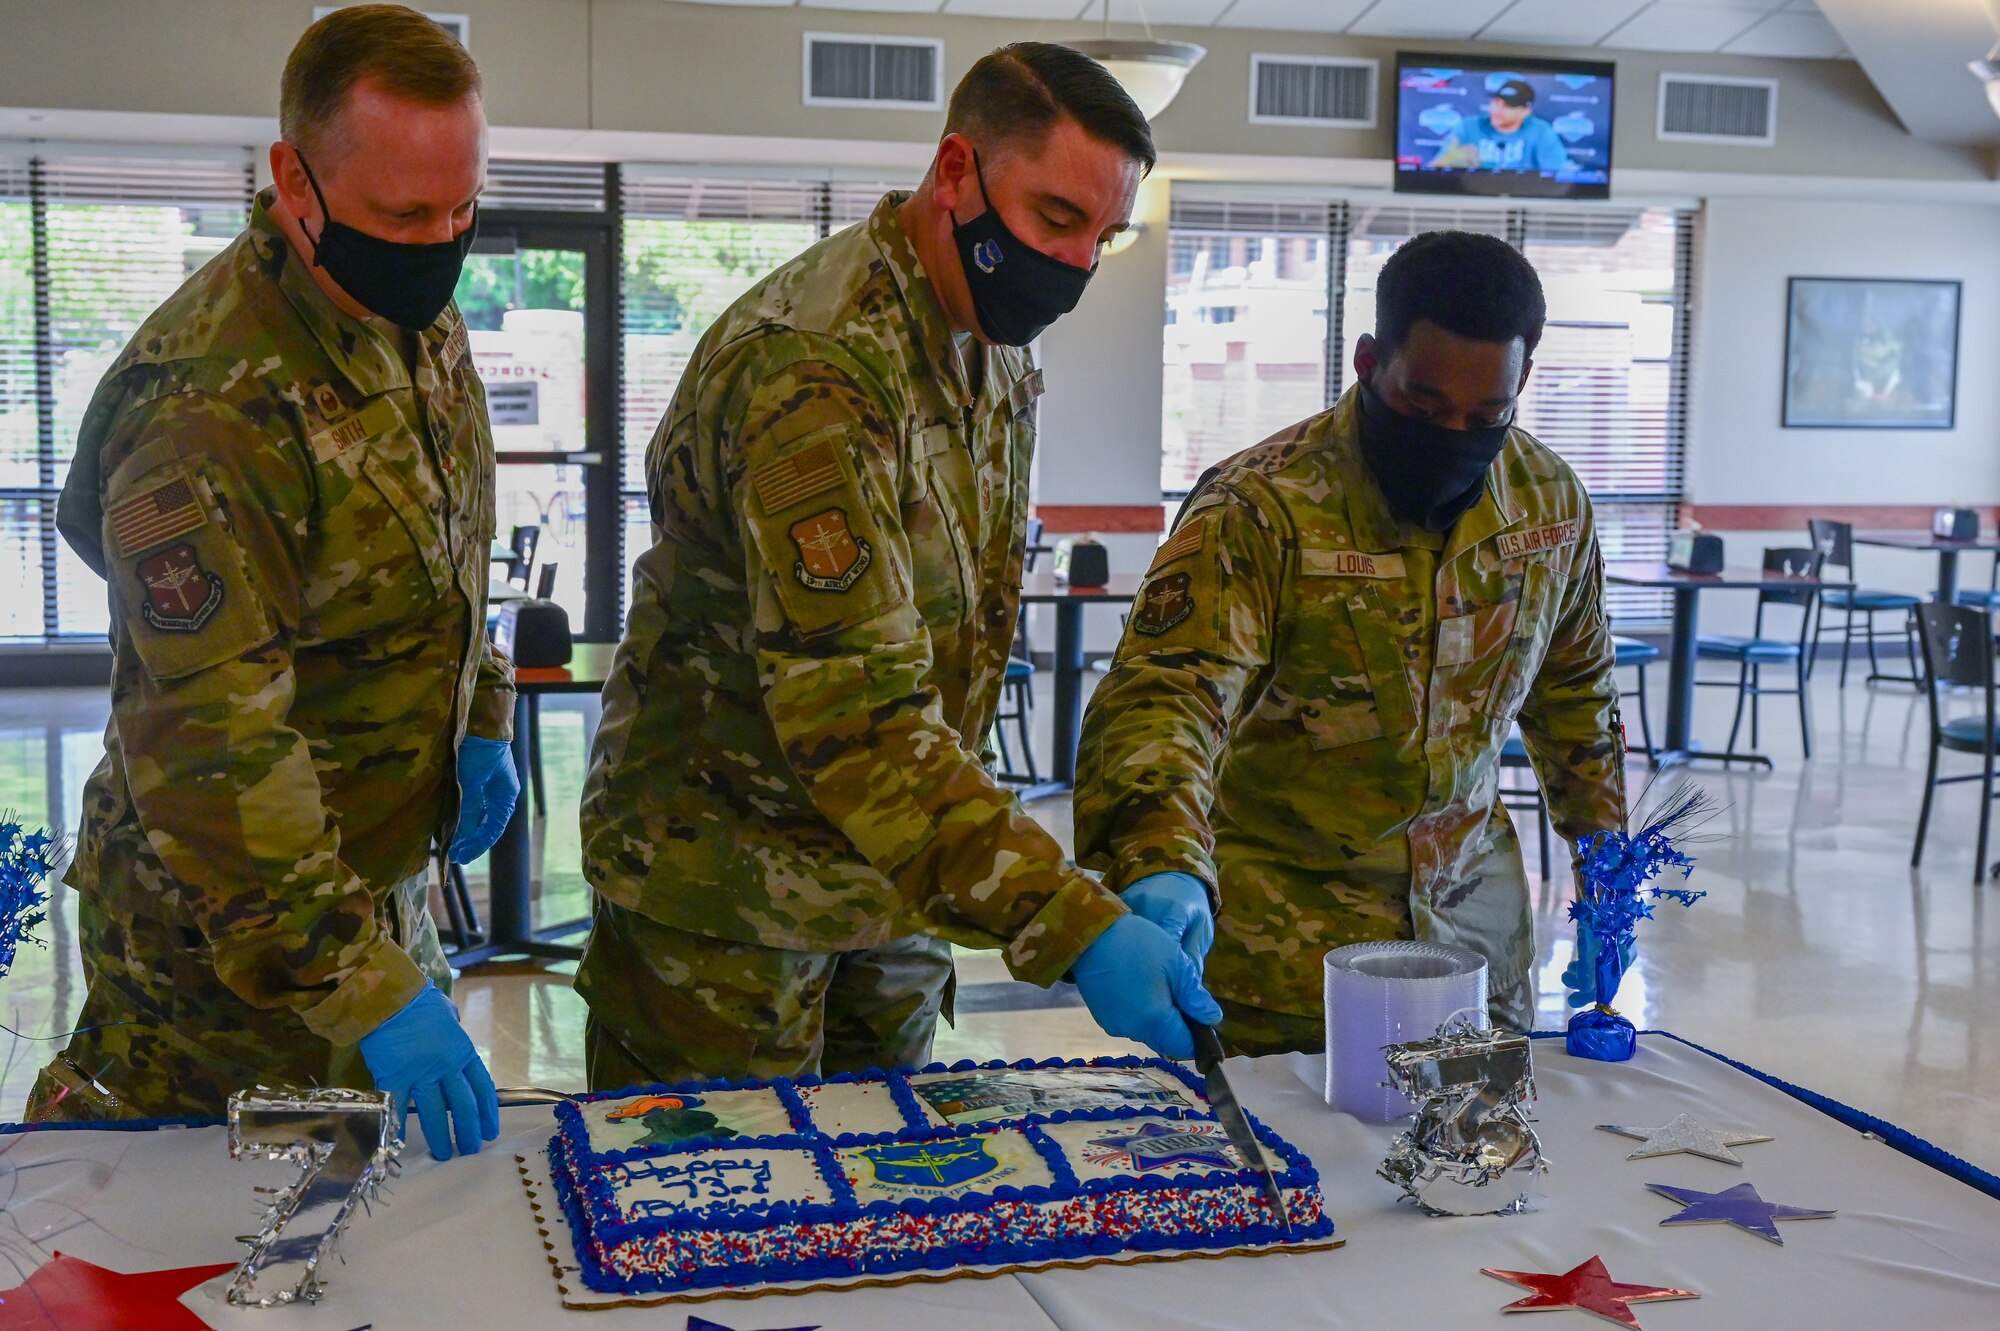 Col. Bernard Smith, 19th Mission Support Group commander, Chief Master Sgt. Steven Hart, 19th Airlift Wing command chief, and Airman Eason Louis, 19th Airlift Wing religious affairs Airman, cut a cake in celebration of the 19th Airlift Wing’s 73rd birthday